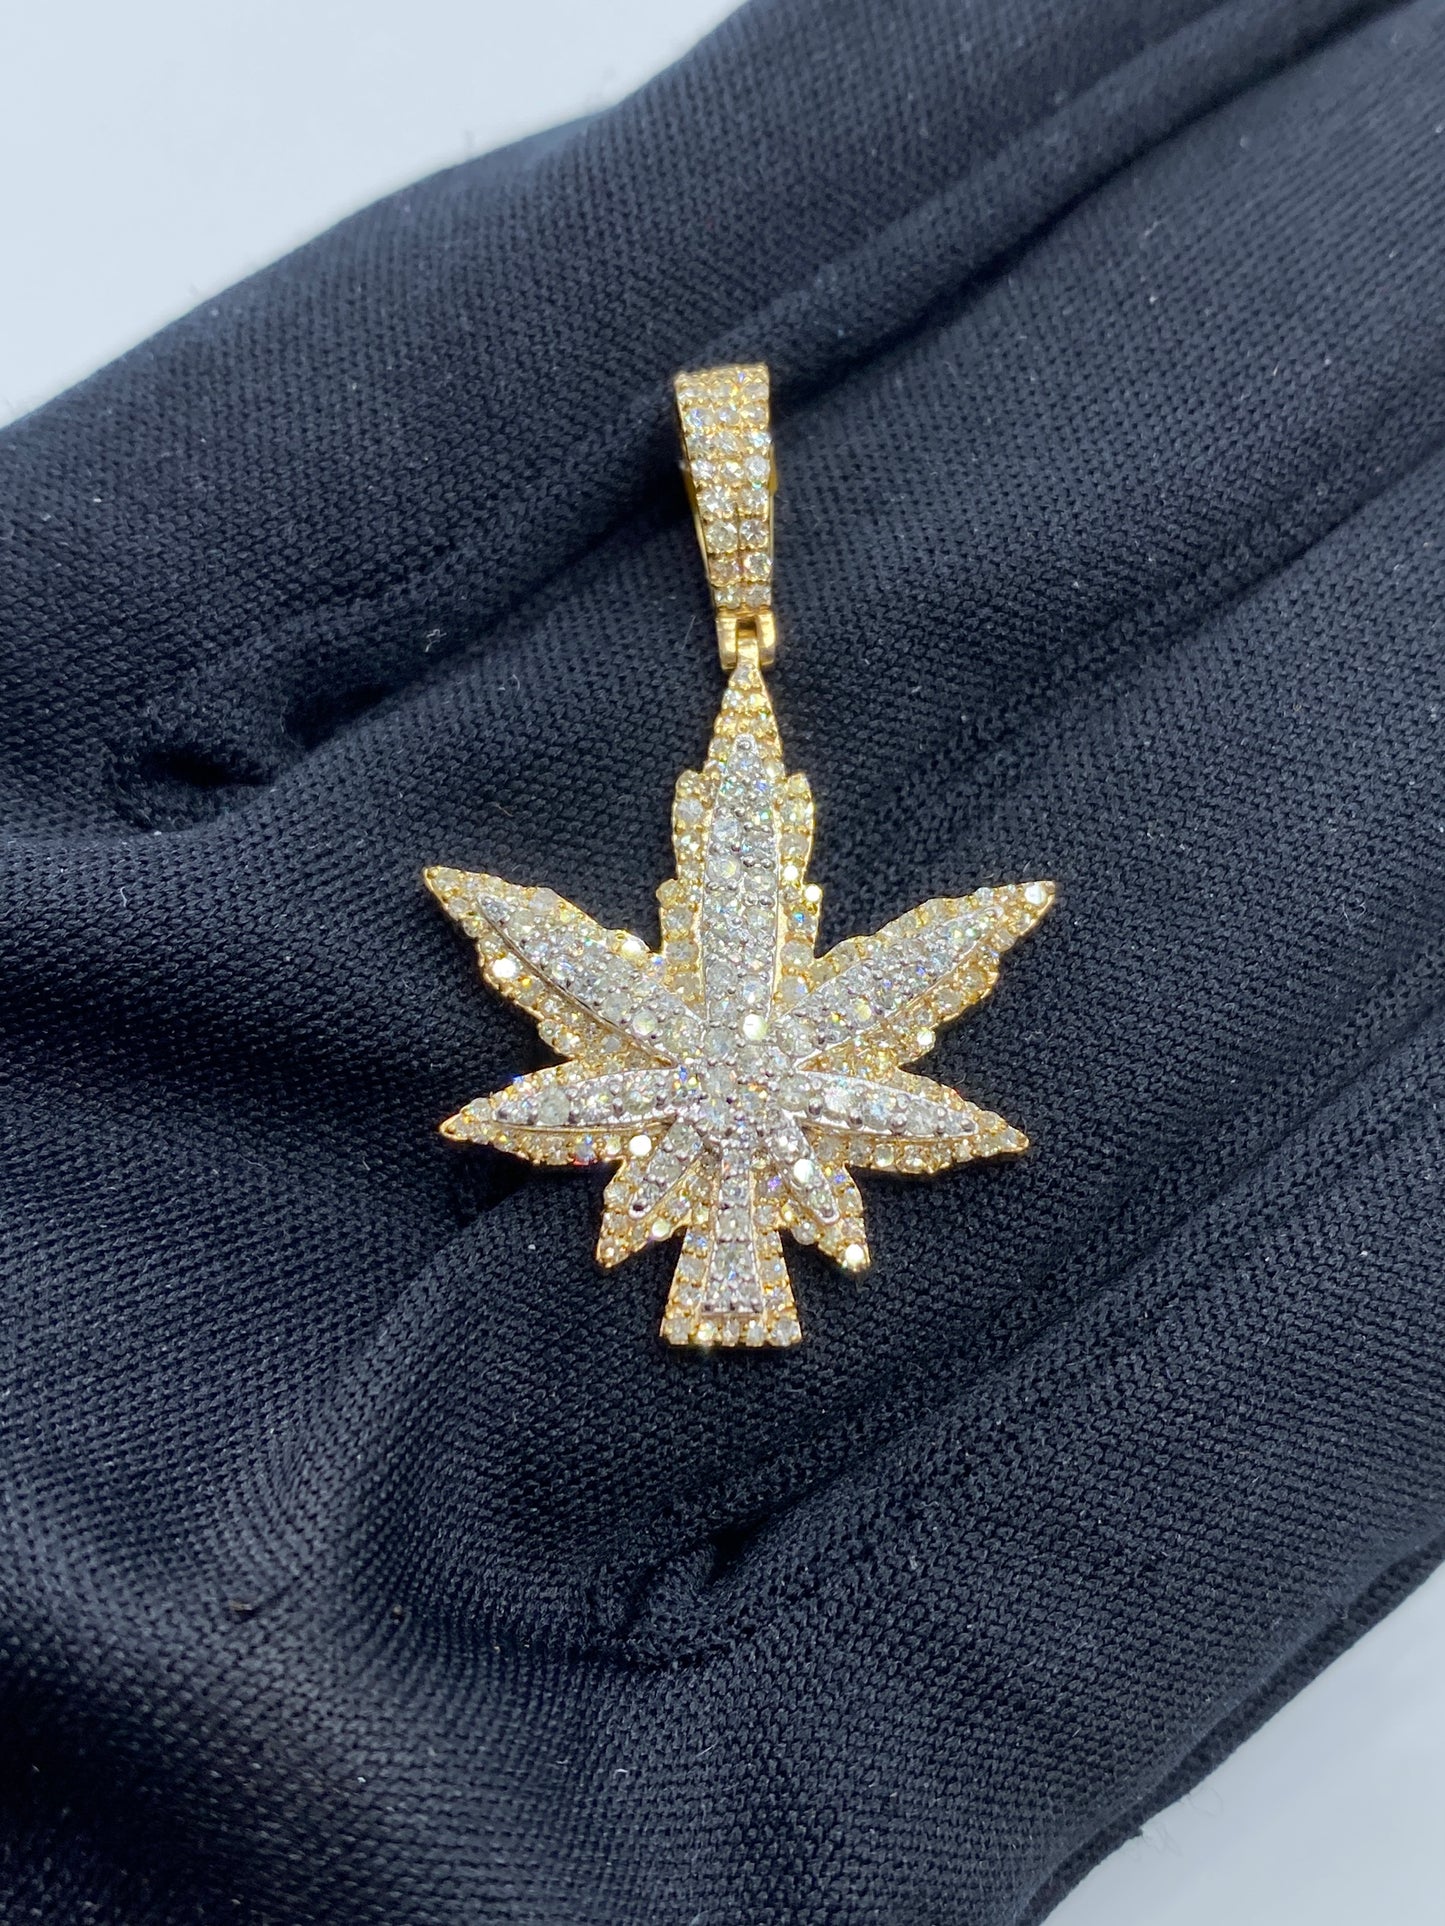 Weed Cannabis Pendant 1.6ct